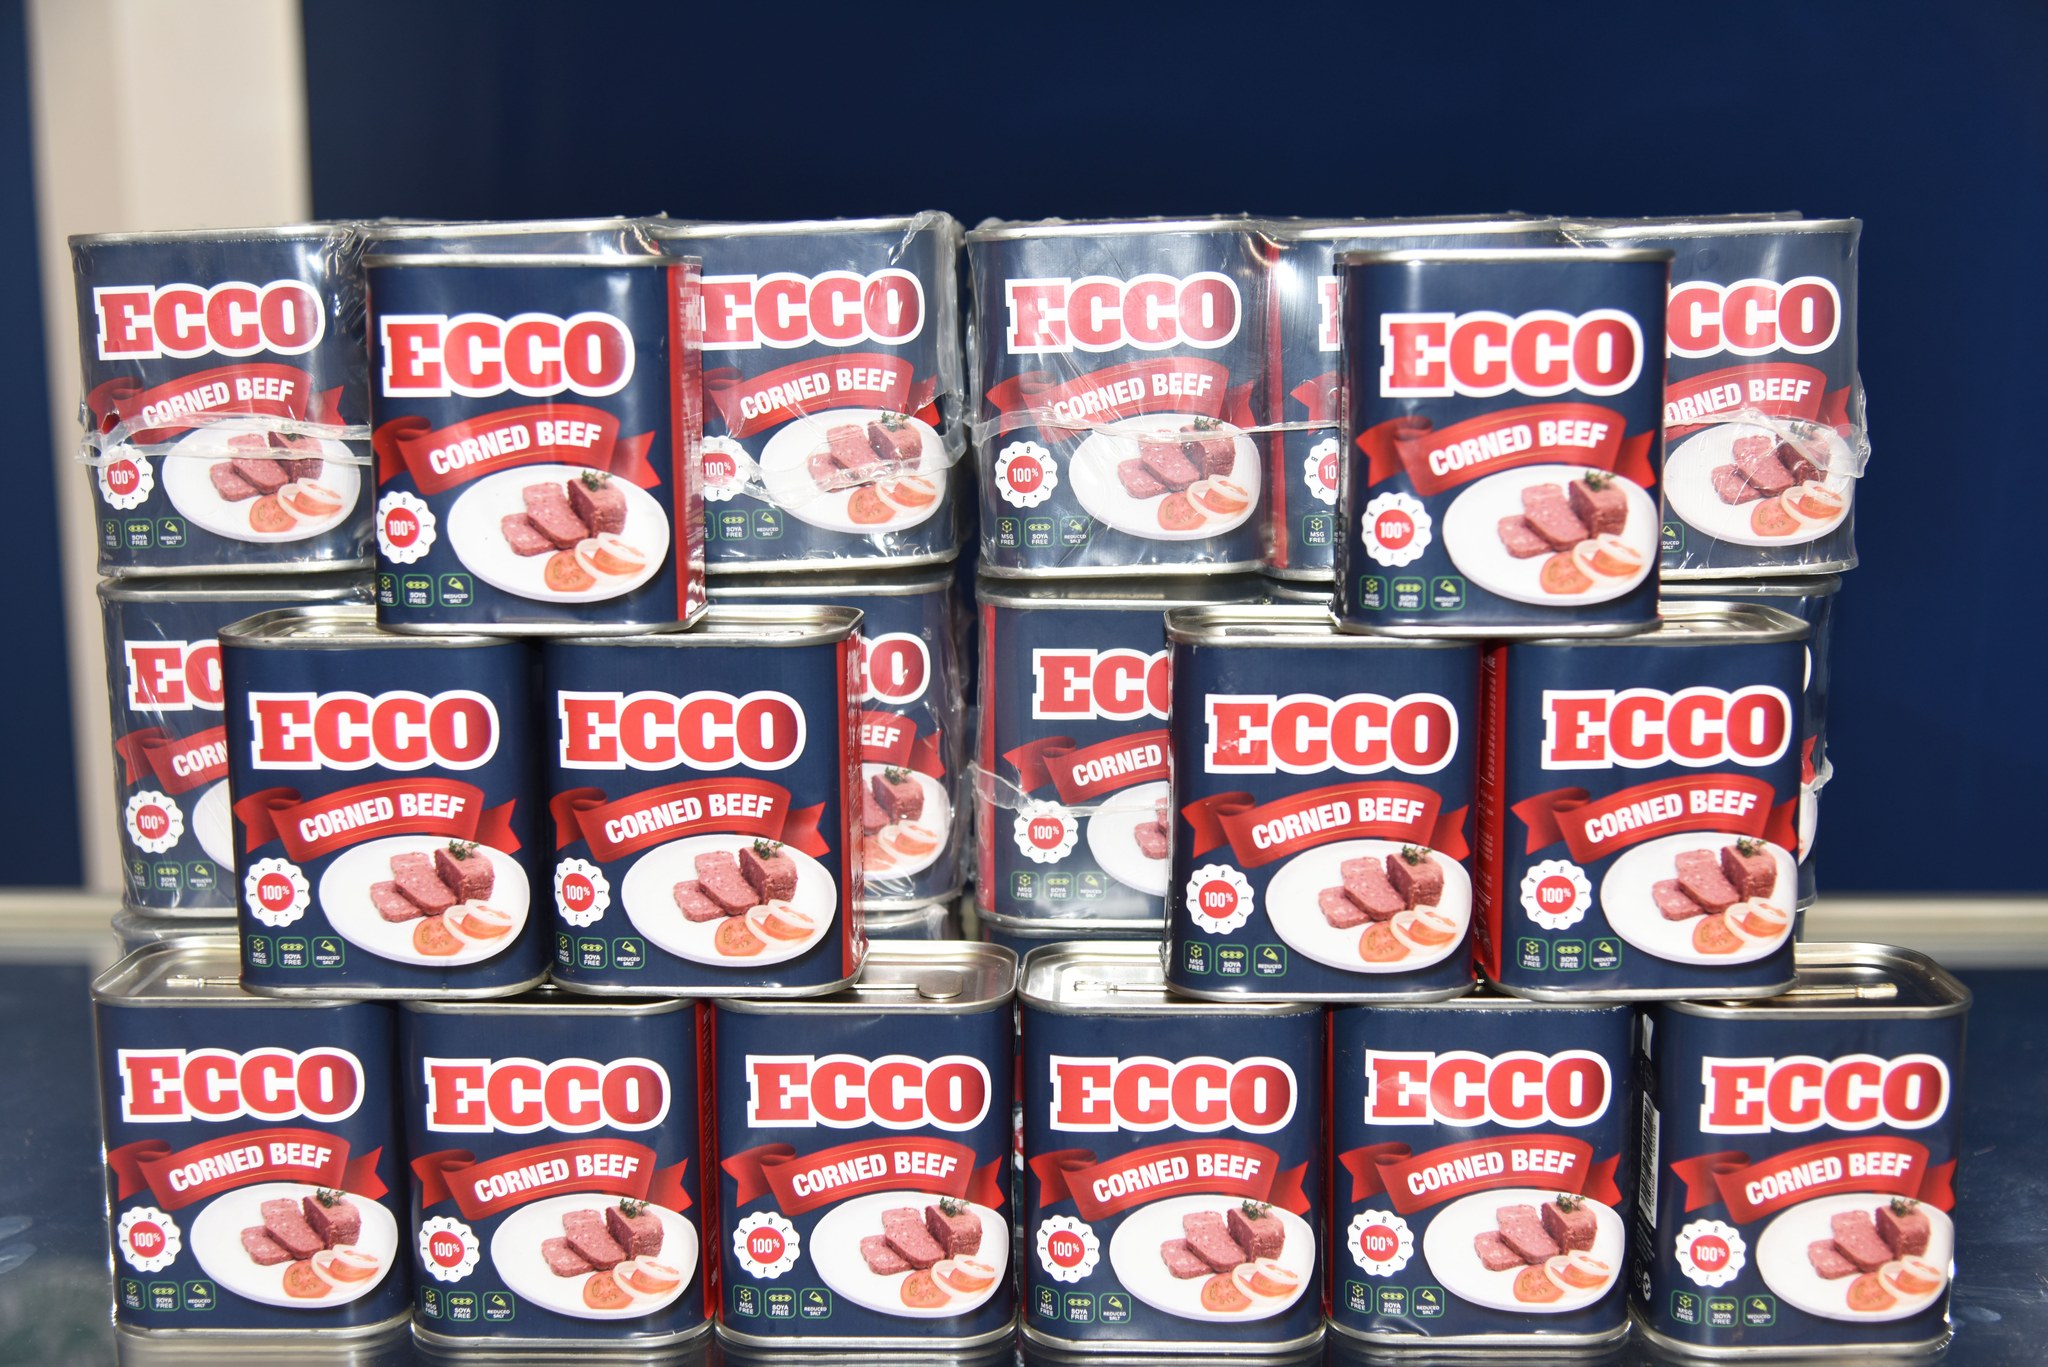 BMC RE-LAUNCH THE 300GRAMS ECCO CORNED BEEF AND CORNED MEATS